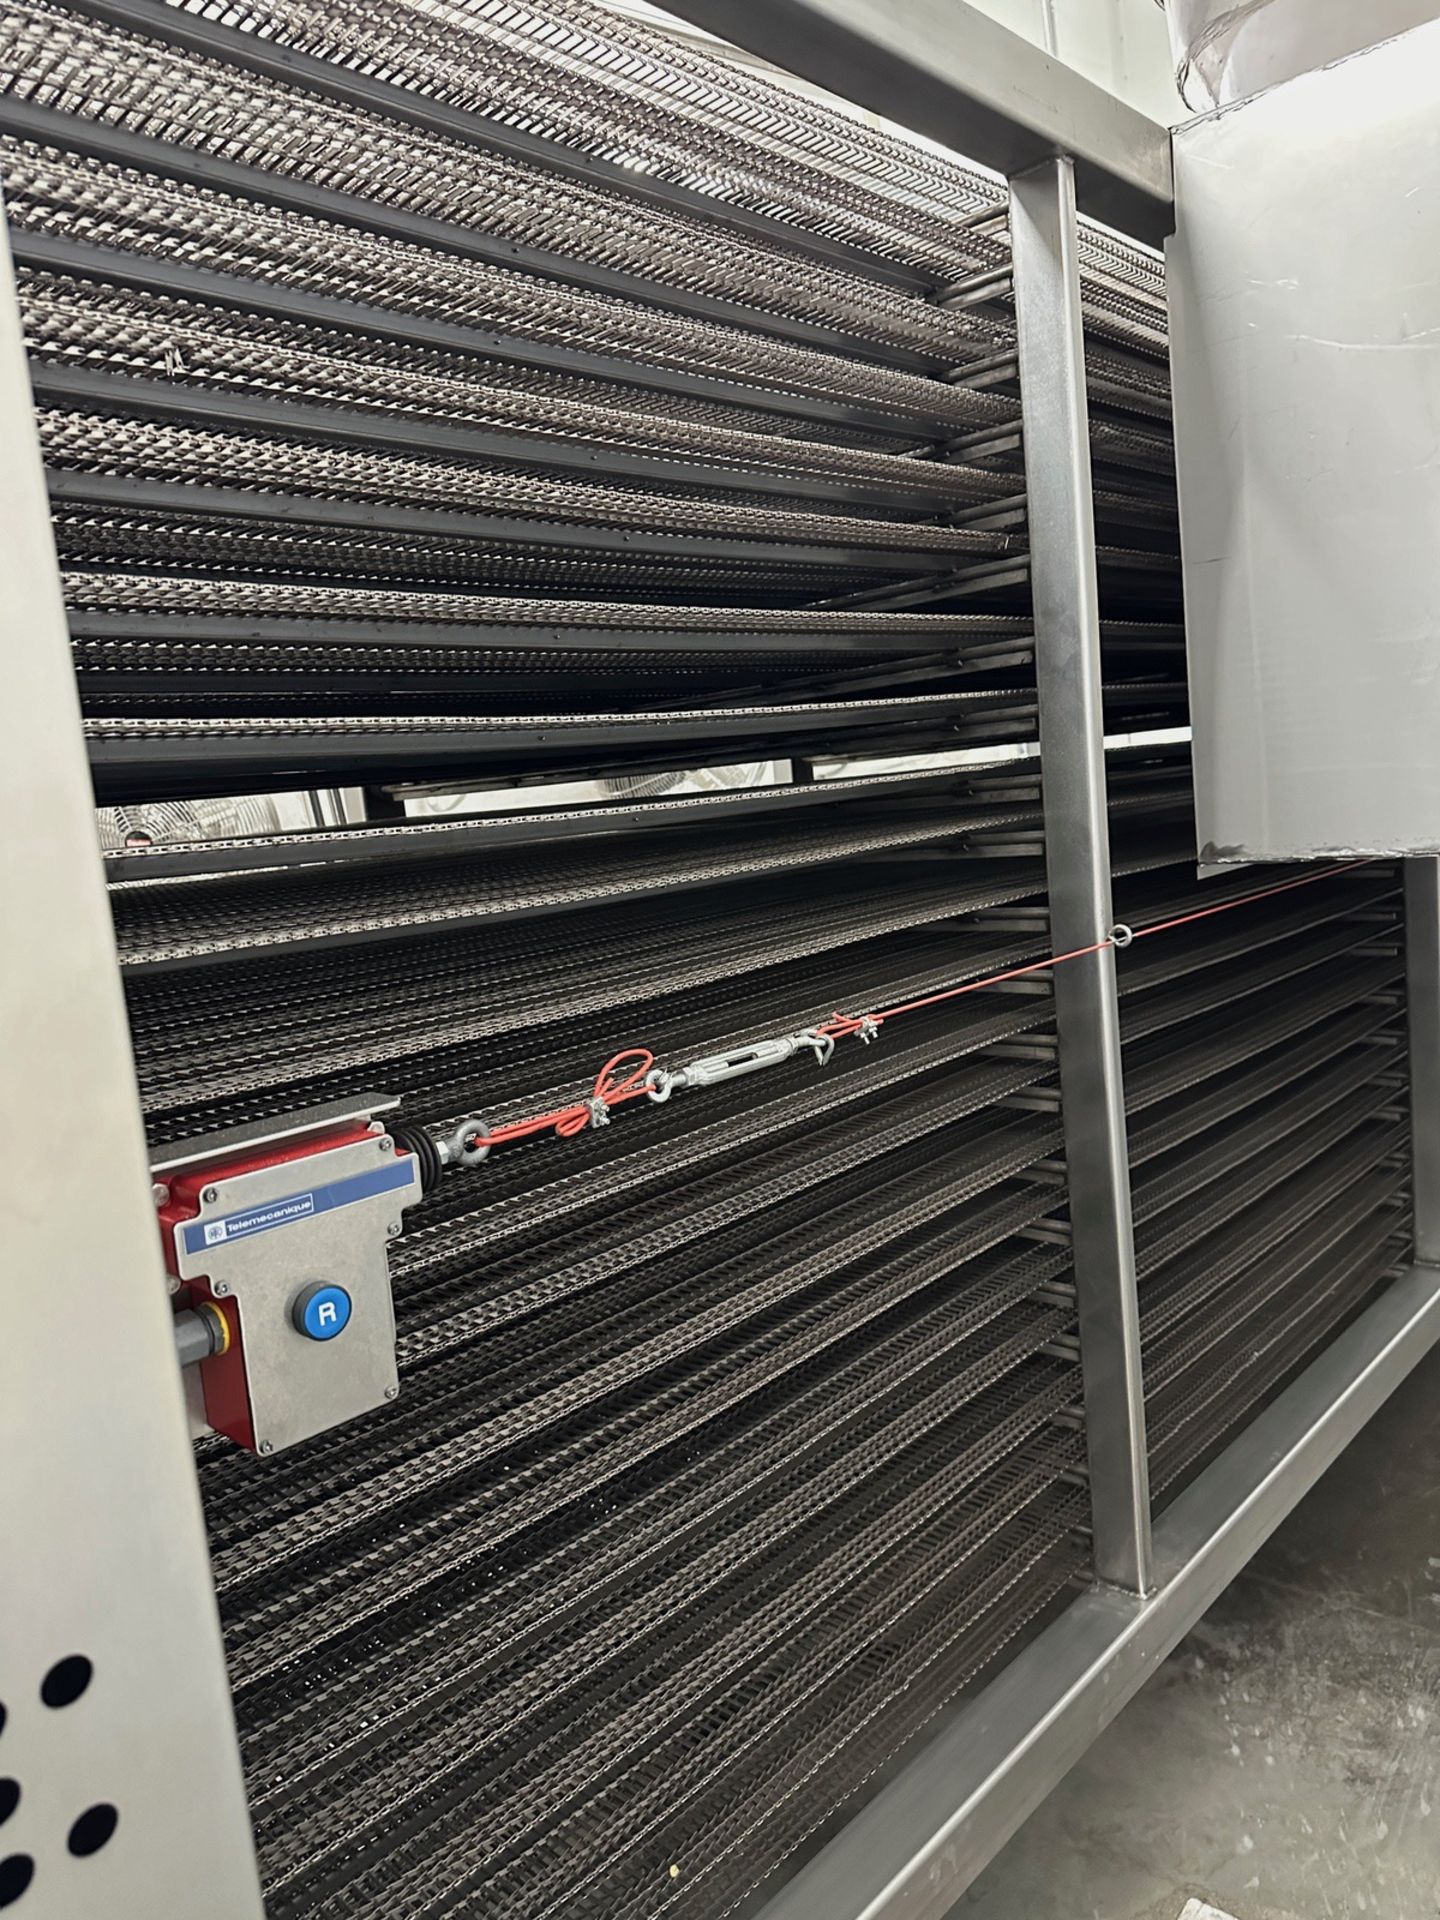 2019 AM Manufacturing Chain Belt Cooling Conveyor (Approx. 48" x 22') | Rig Fee $2500 - Image 6 of 7